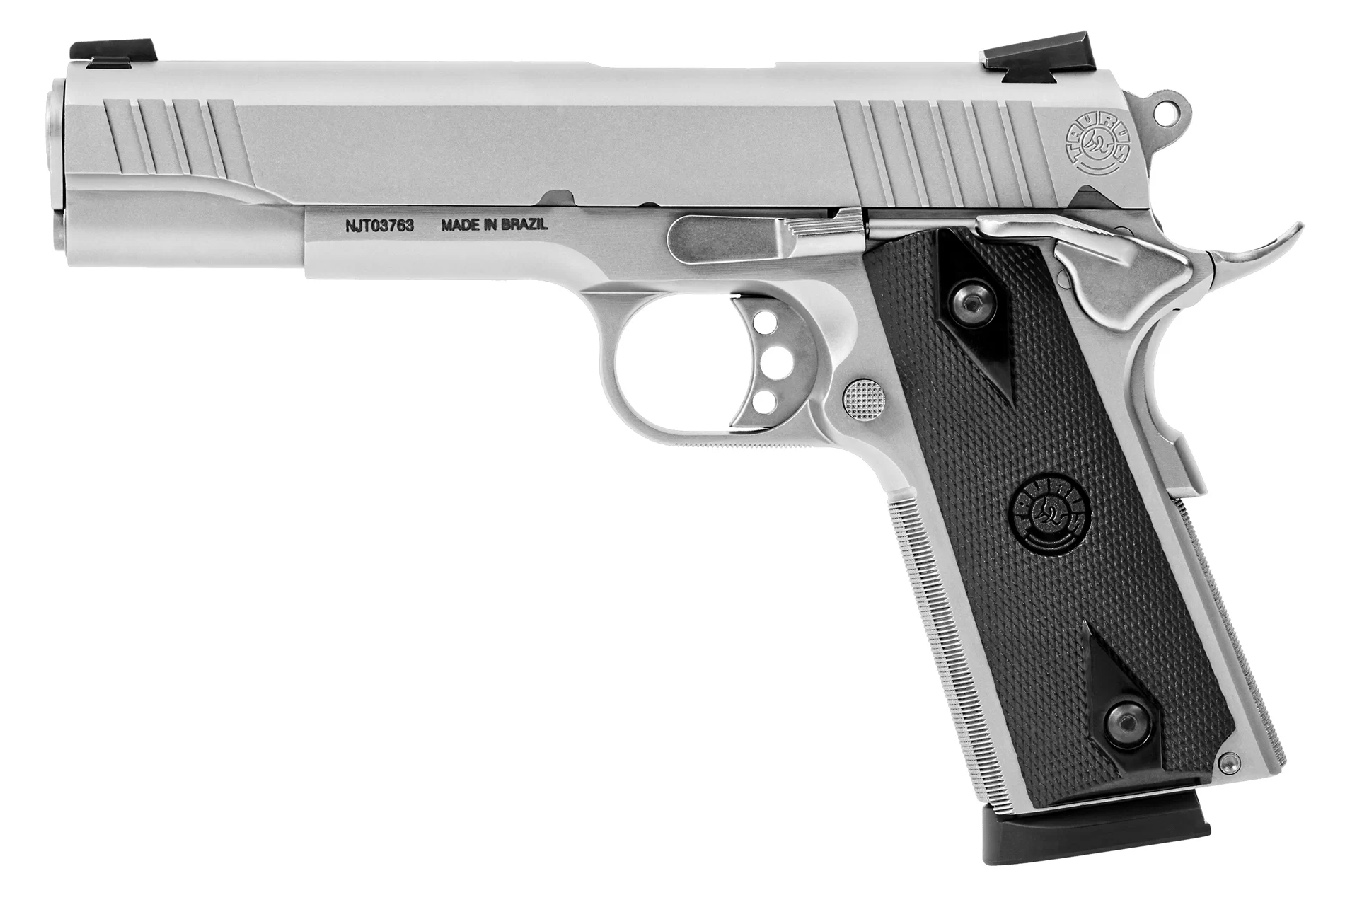 No. 12 Best Selling: TAURUS 1911 45 ACP FULL-SIZE STAINLESS PISTOL